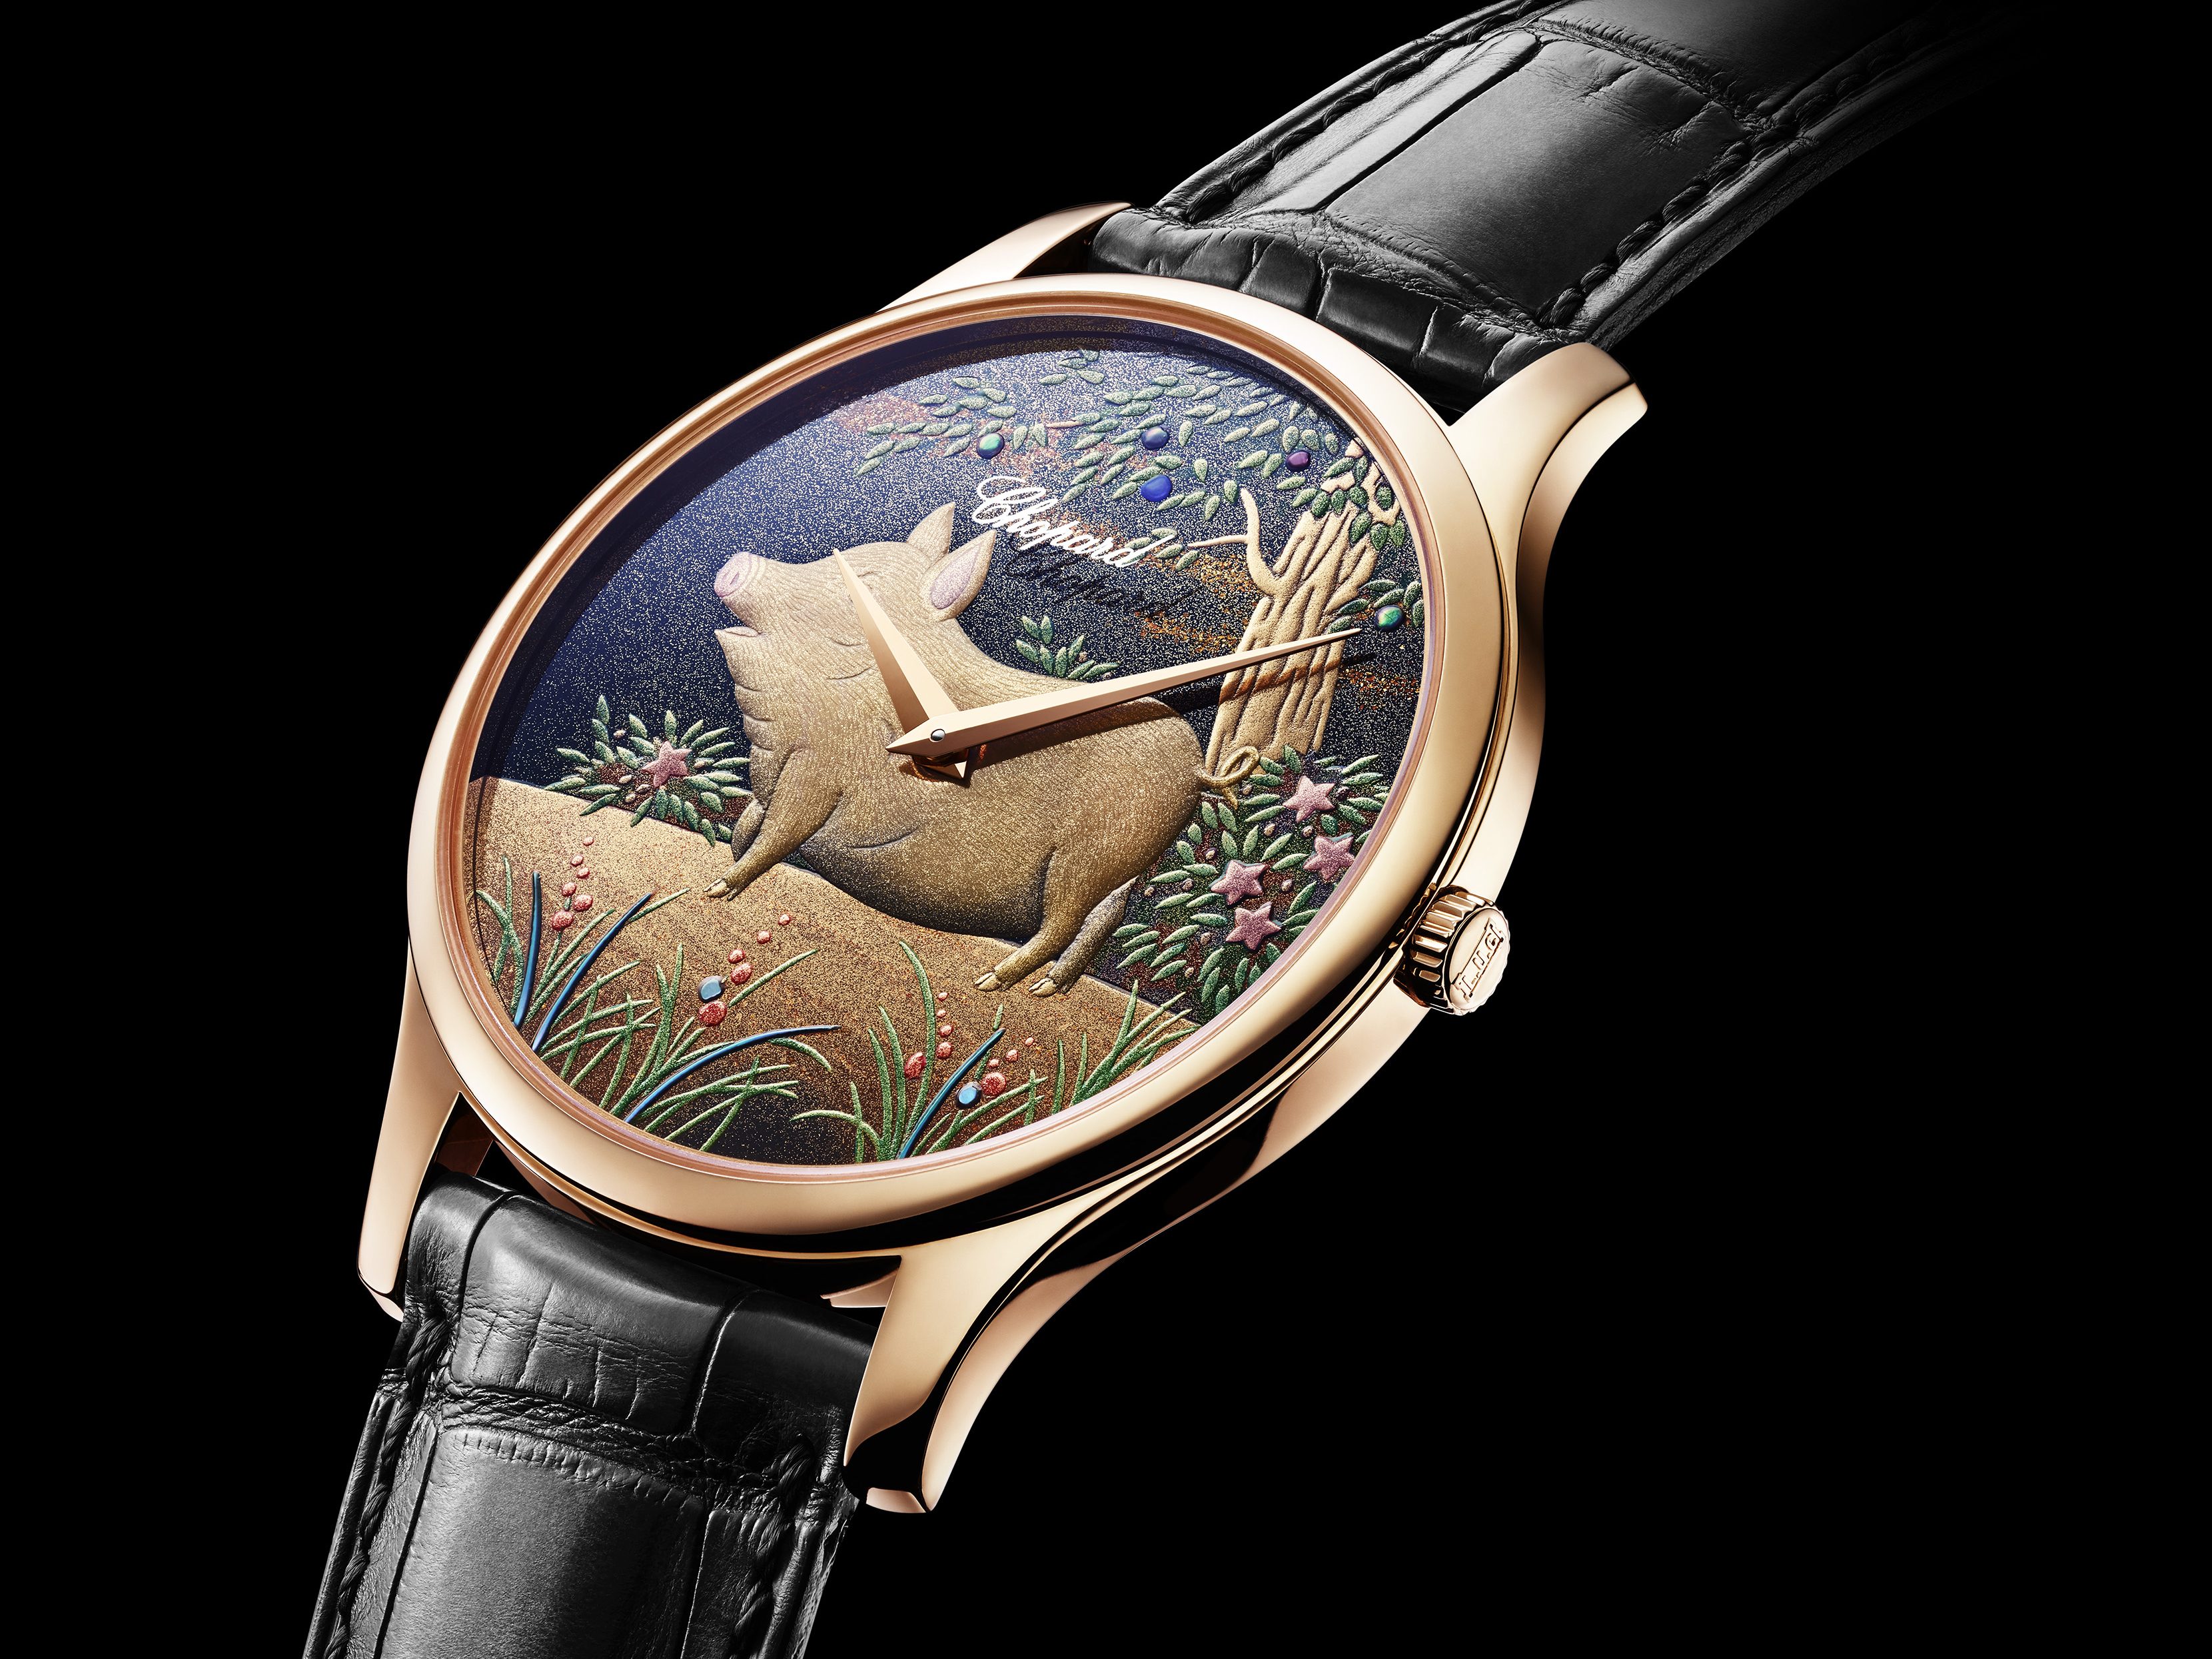 Phenomenal timepieces to ring in the Lunar New Year